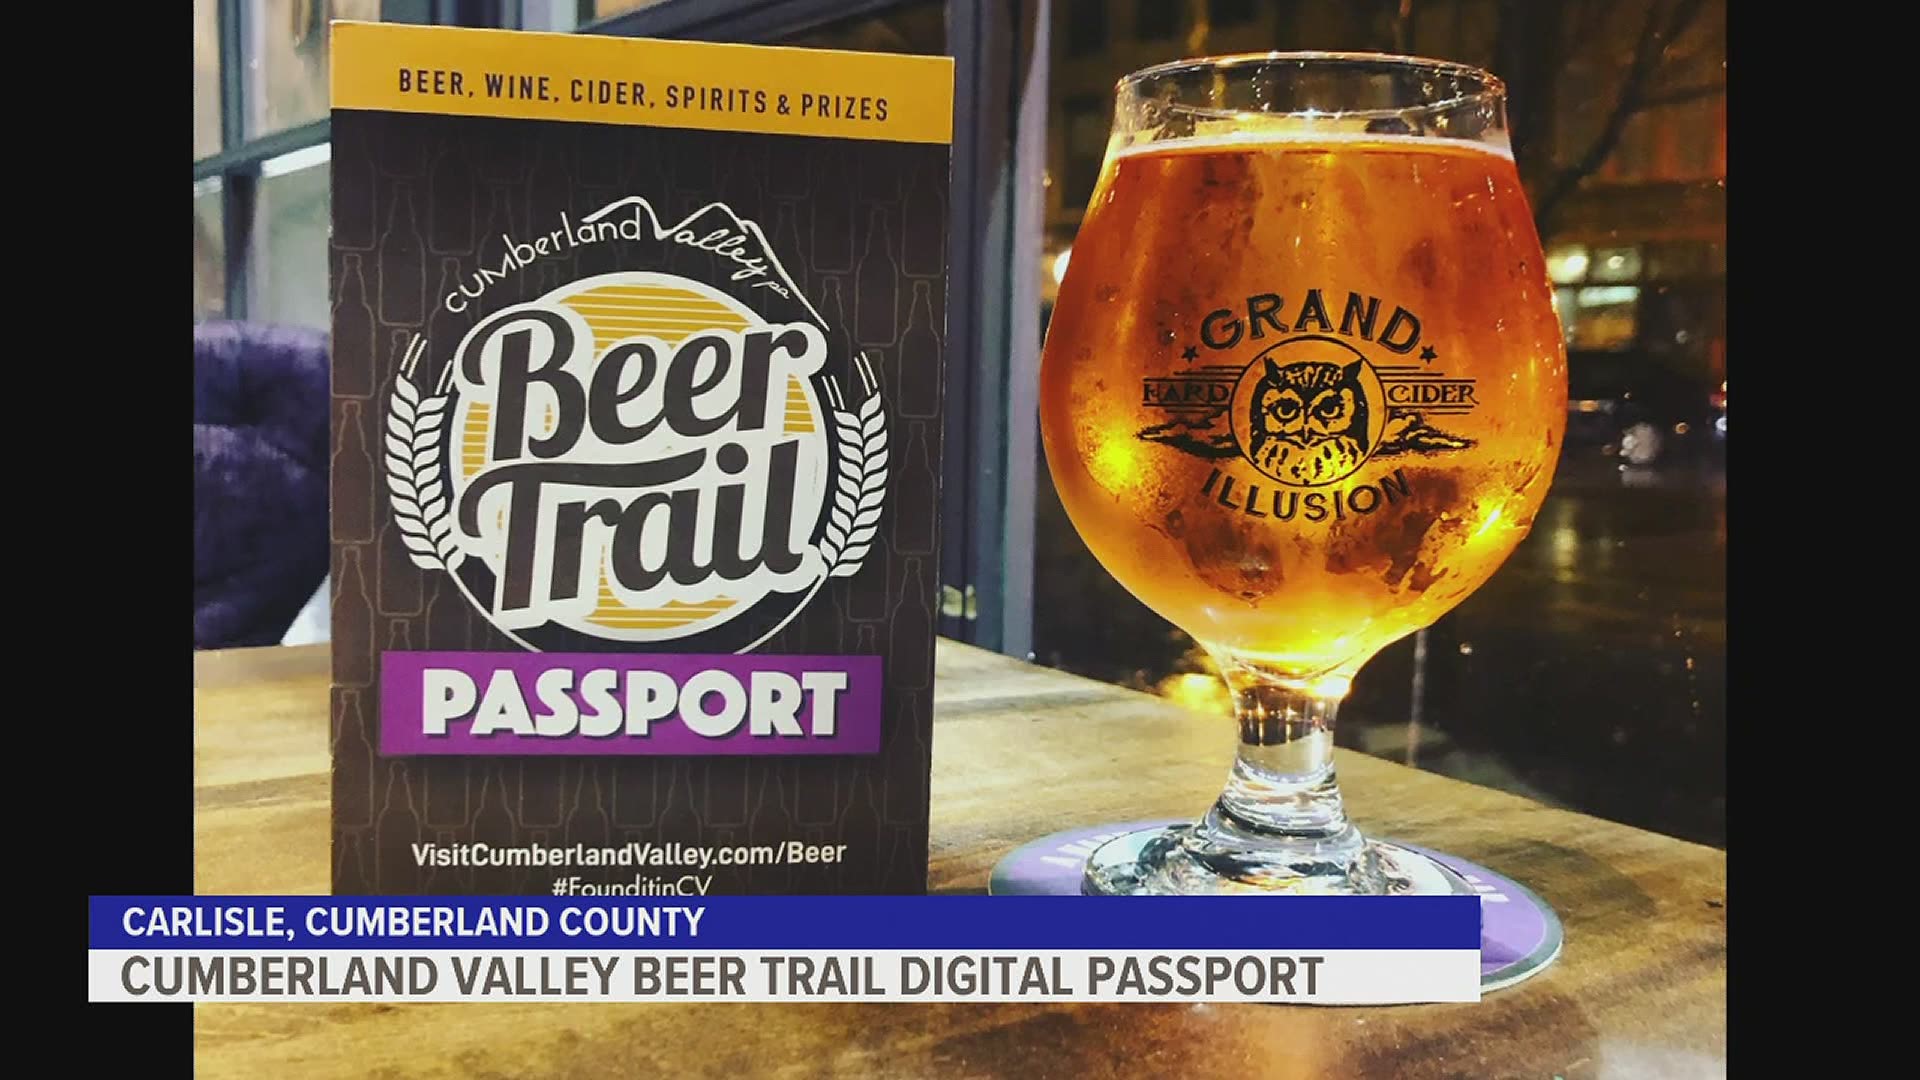 Officials with the Cumberland Valley Beer Trail  launch their digital passport program.